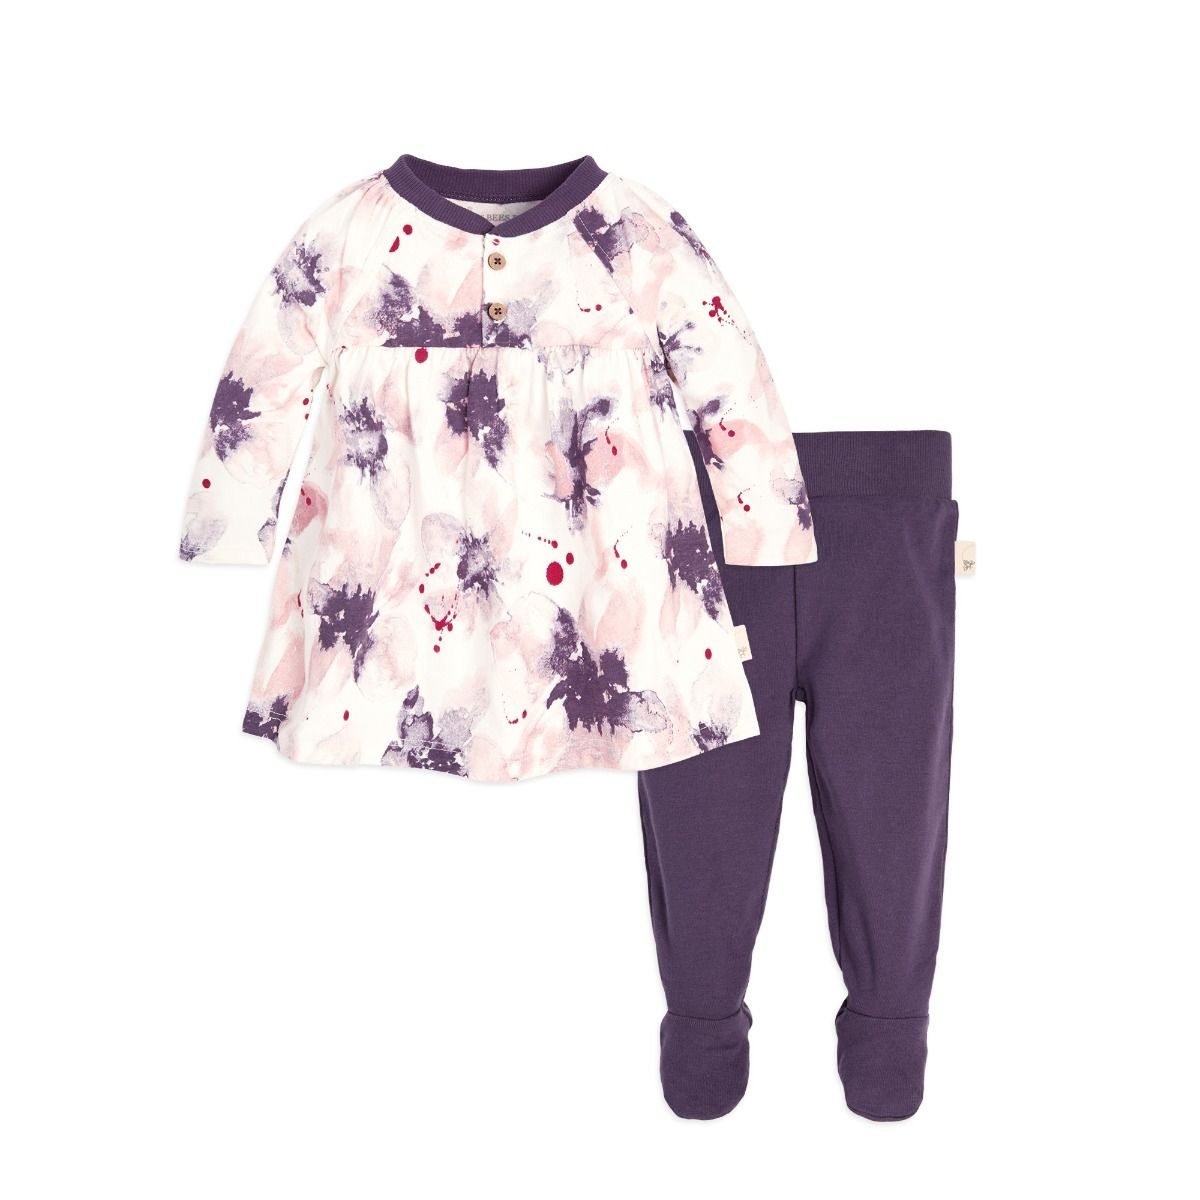 Exploded Petals Organic Baby Cotton Dress & Footed Pant Set